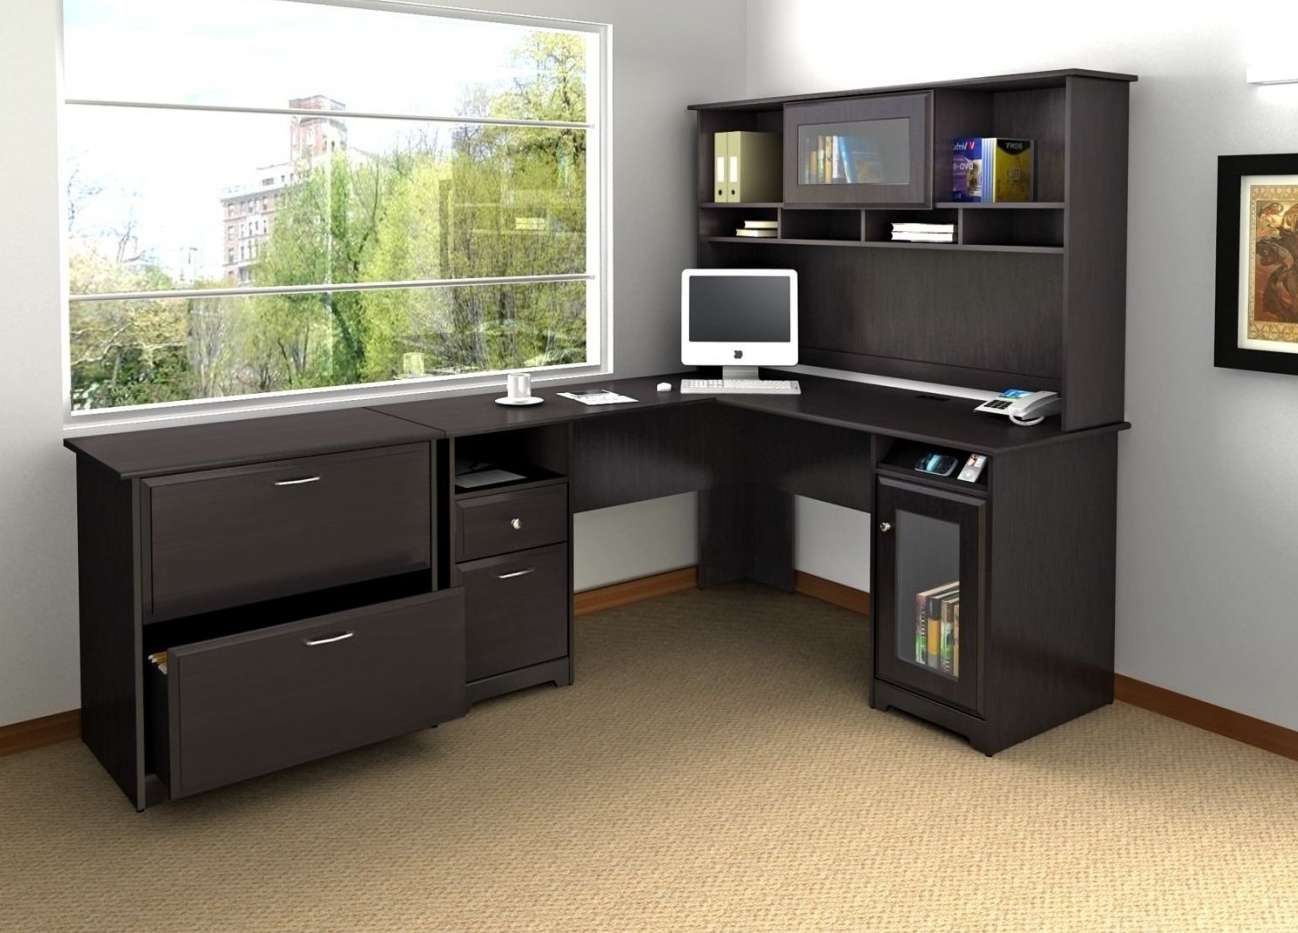 Tips To Buy the Right Kind of Home Office Furniture